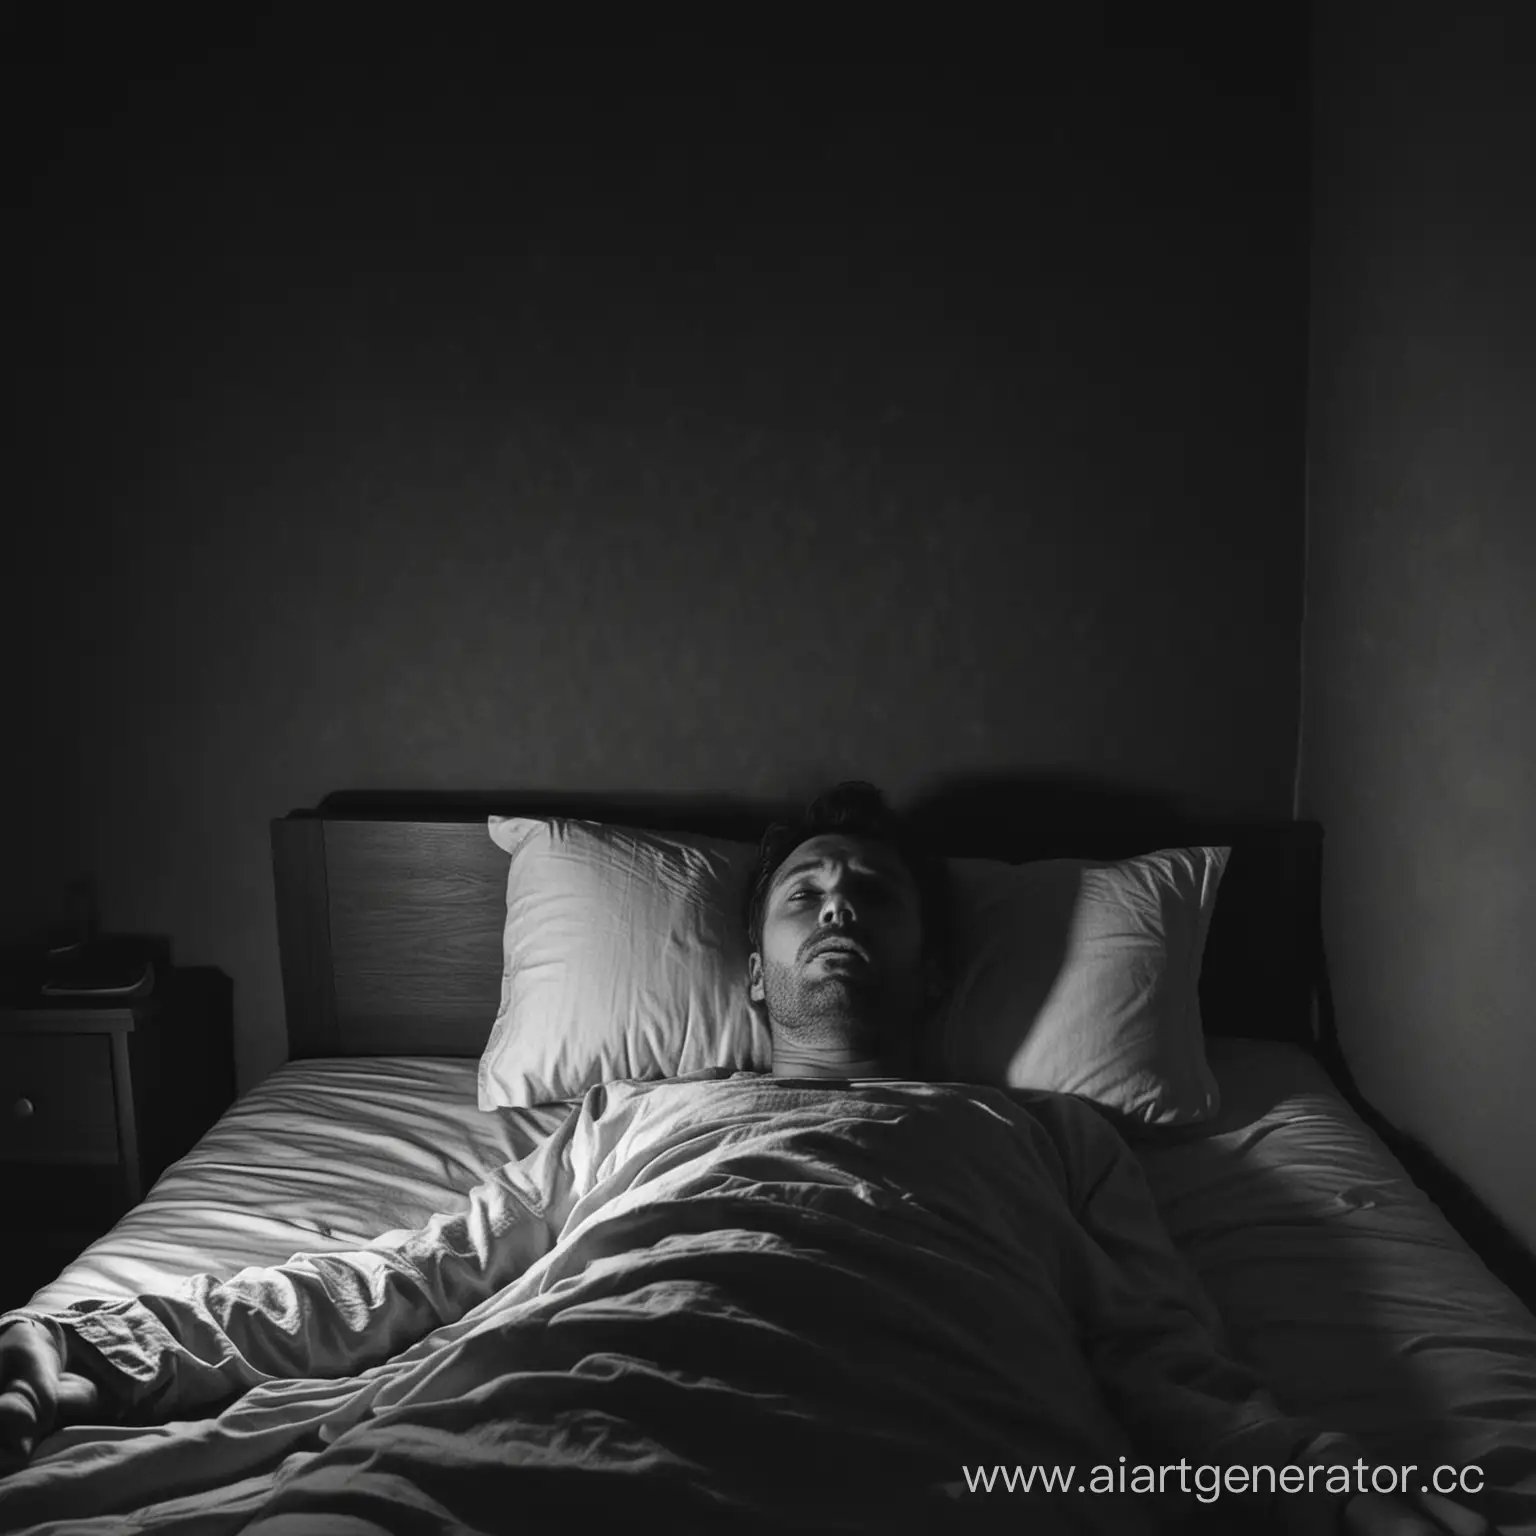 Man-in-Bed-Surrounded-by-Darkness-at-Night-with-Overwhelming-Fear